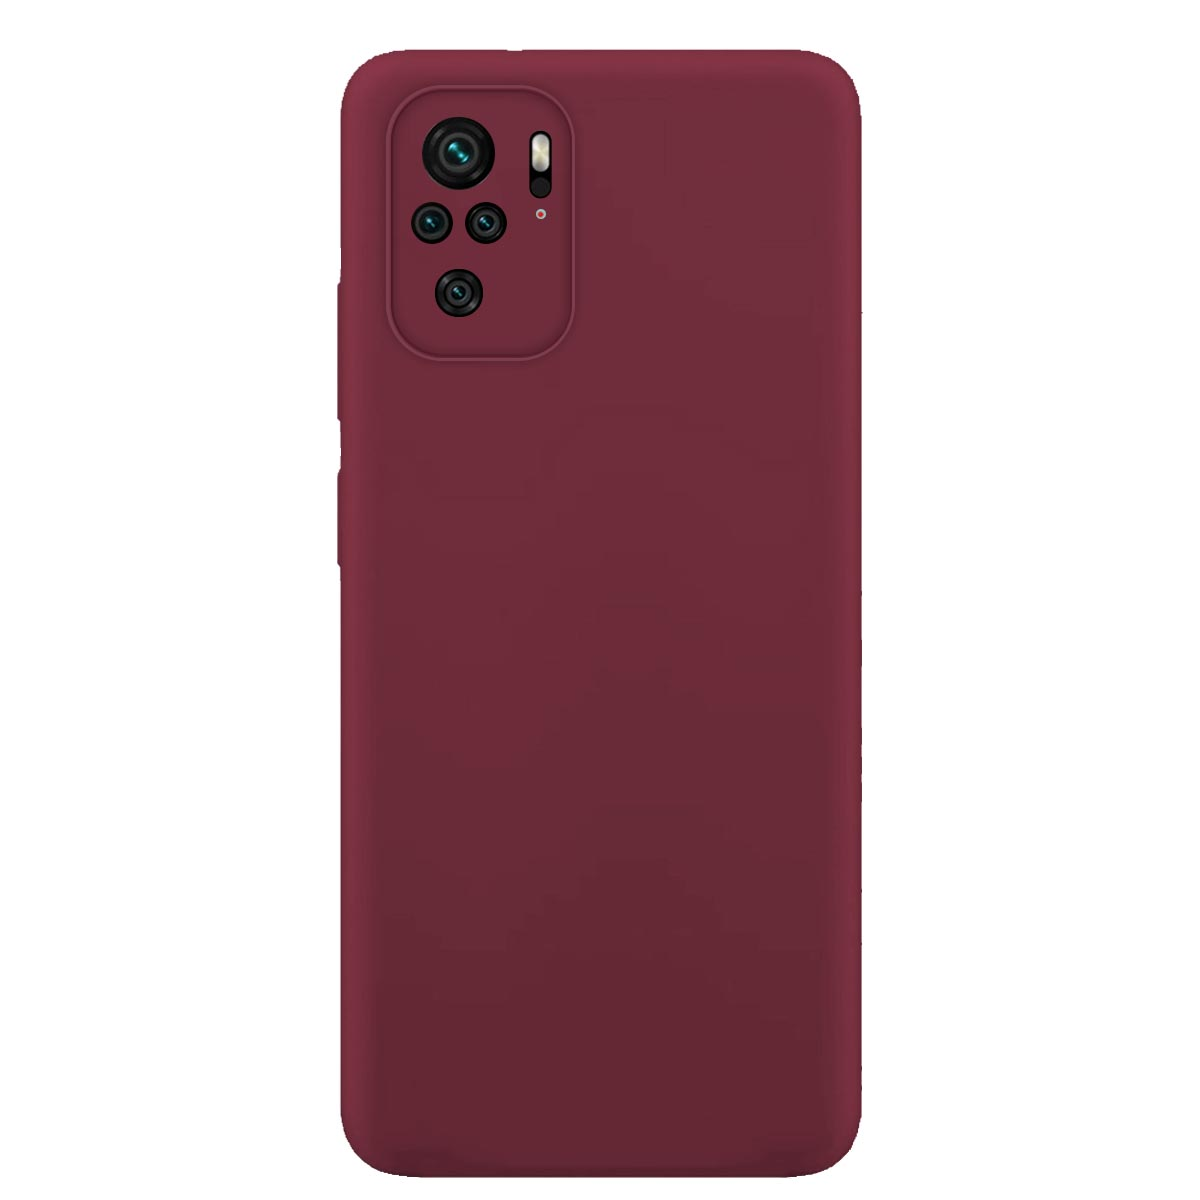 Redmi Redmi Backcover, Note MORE 10S, Note Xiaomi, ENERGY 4G, 10 MTB Soft Case, Silikon Weinrot